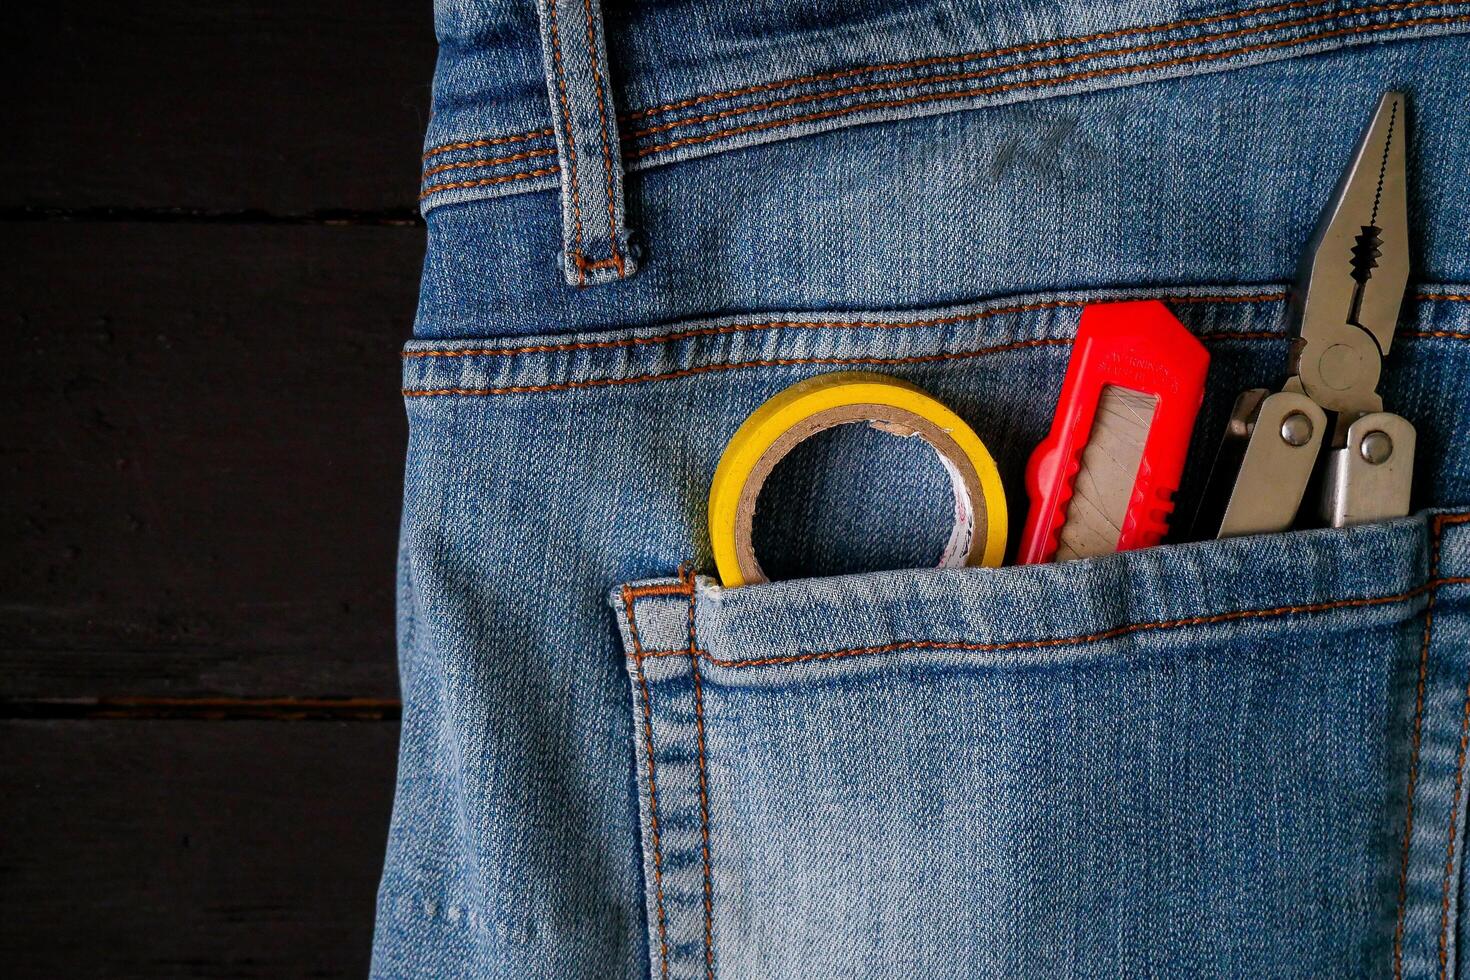 a pair of scissors and a pair of pliers in a pocket photo